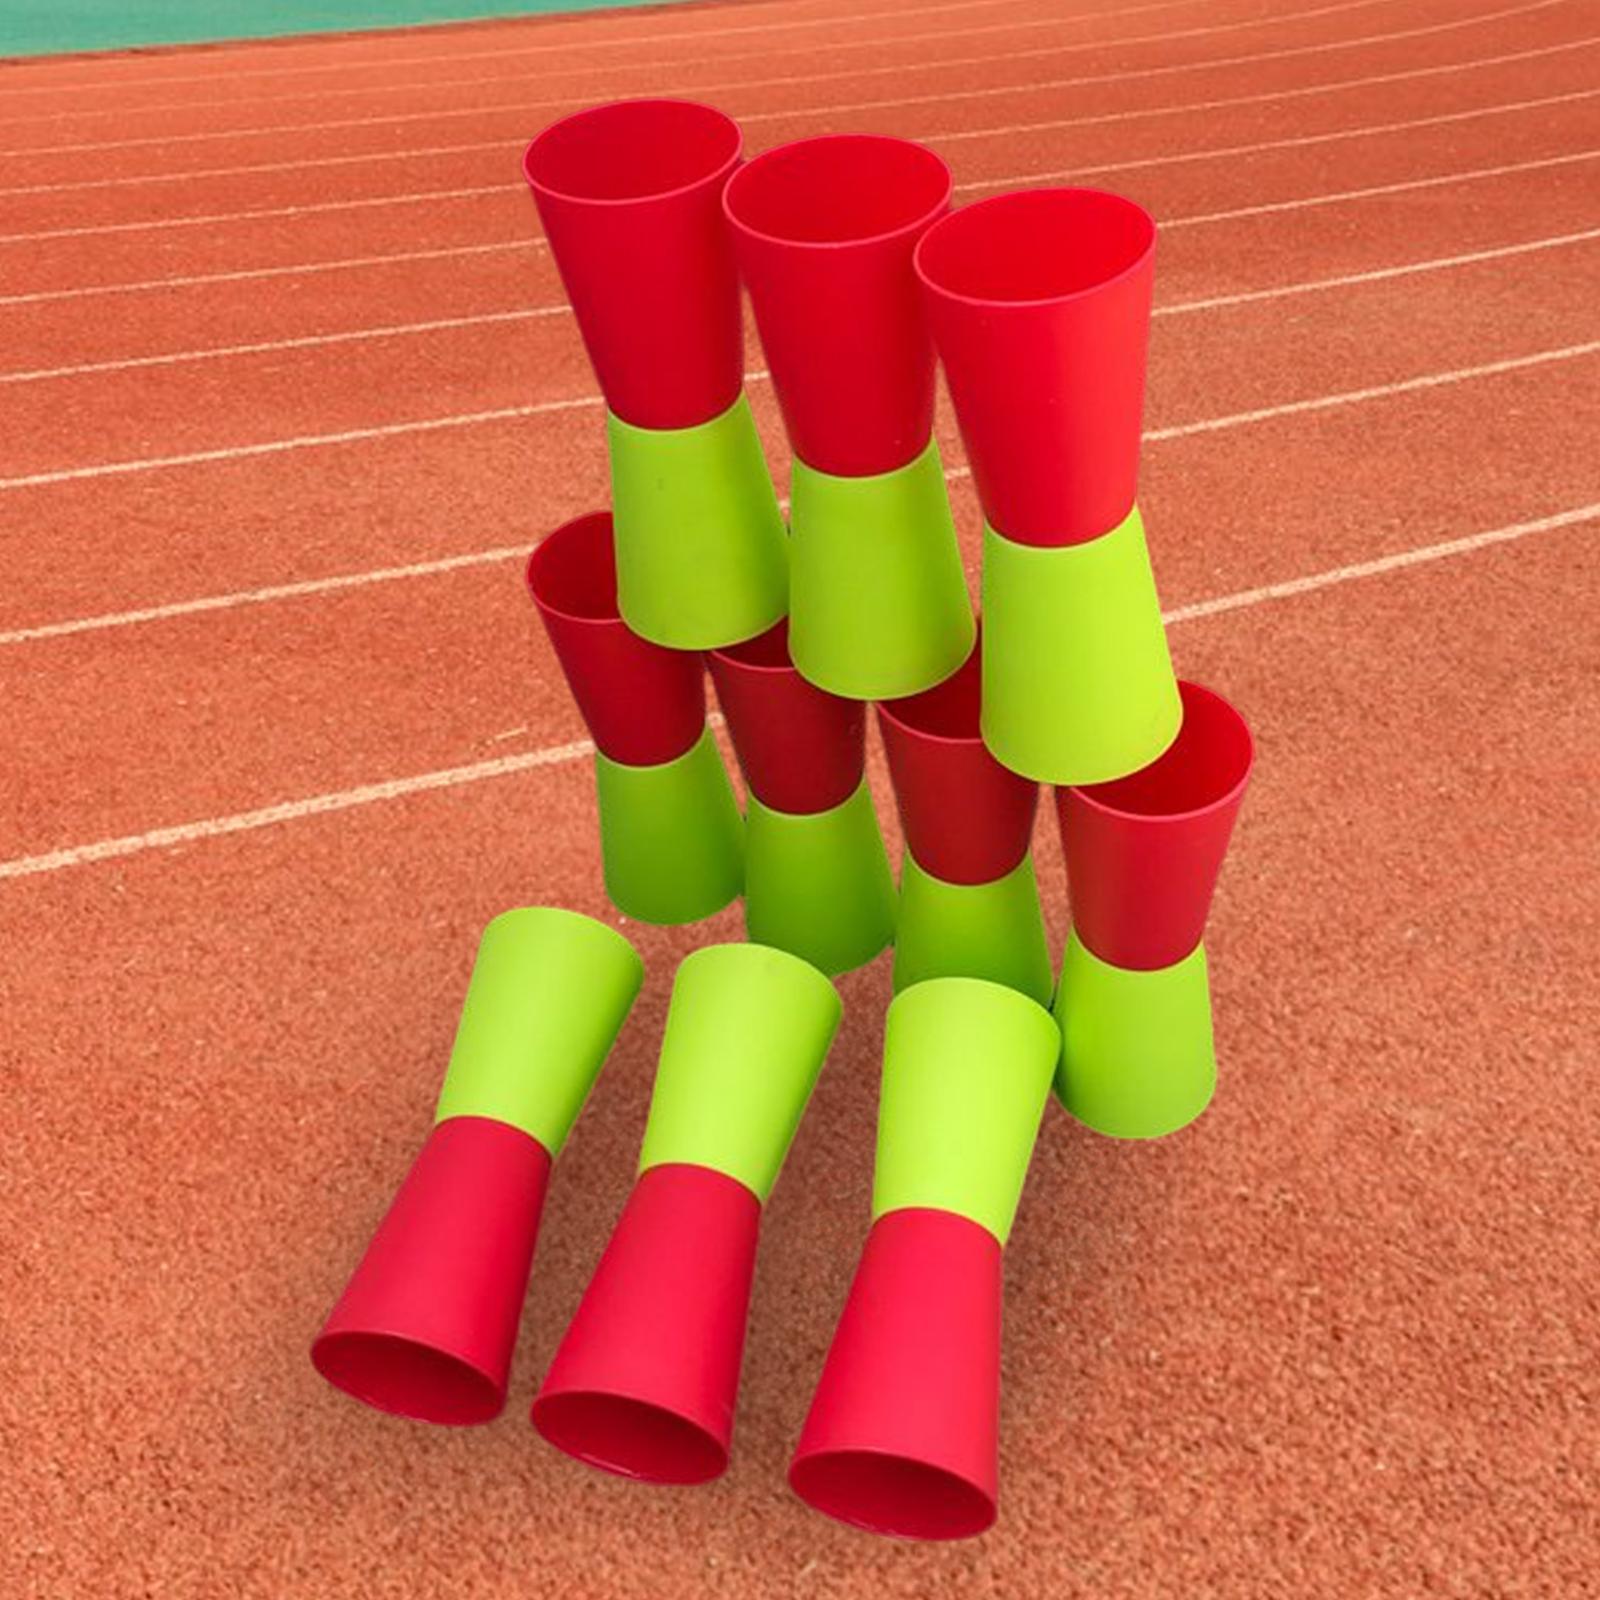 10Pcs Flip Cups Agility Training Running for Basketball Indoor Red Green